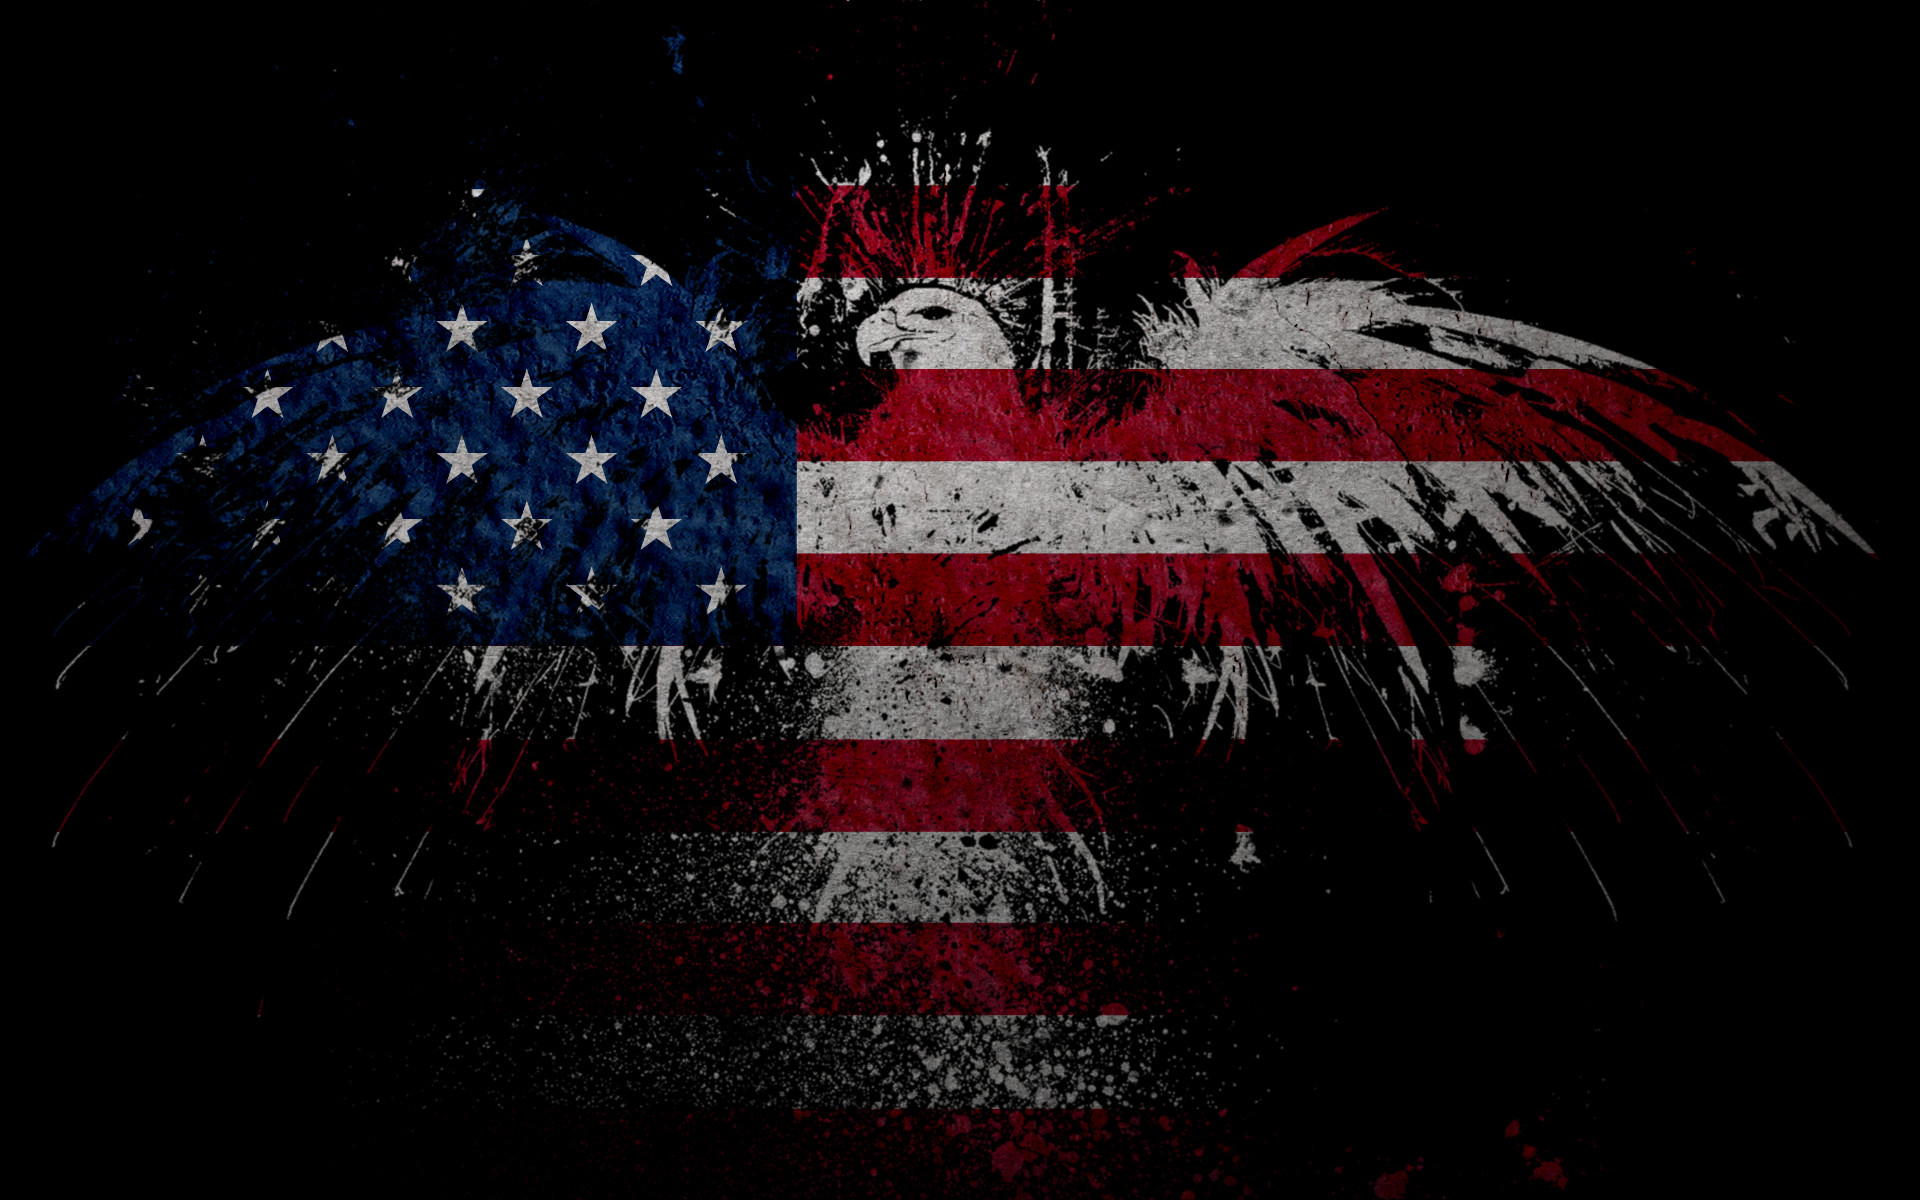 Found this badass American Eagle Flag Wallpaper while doing some Murican